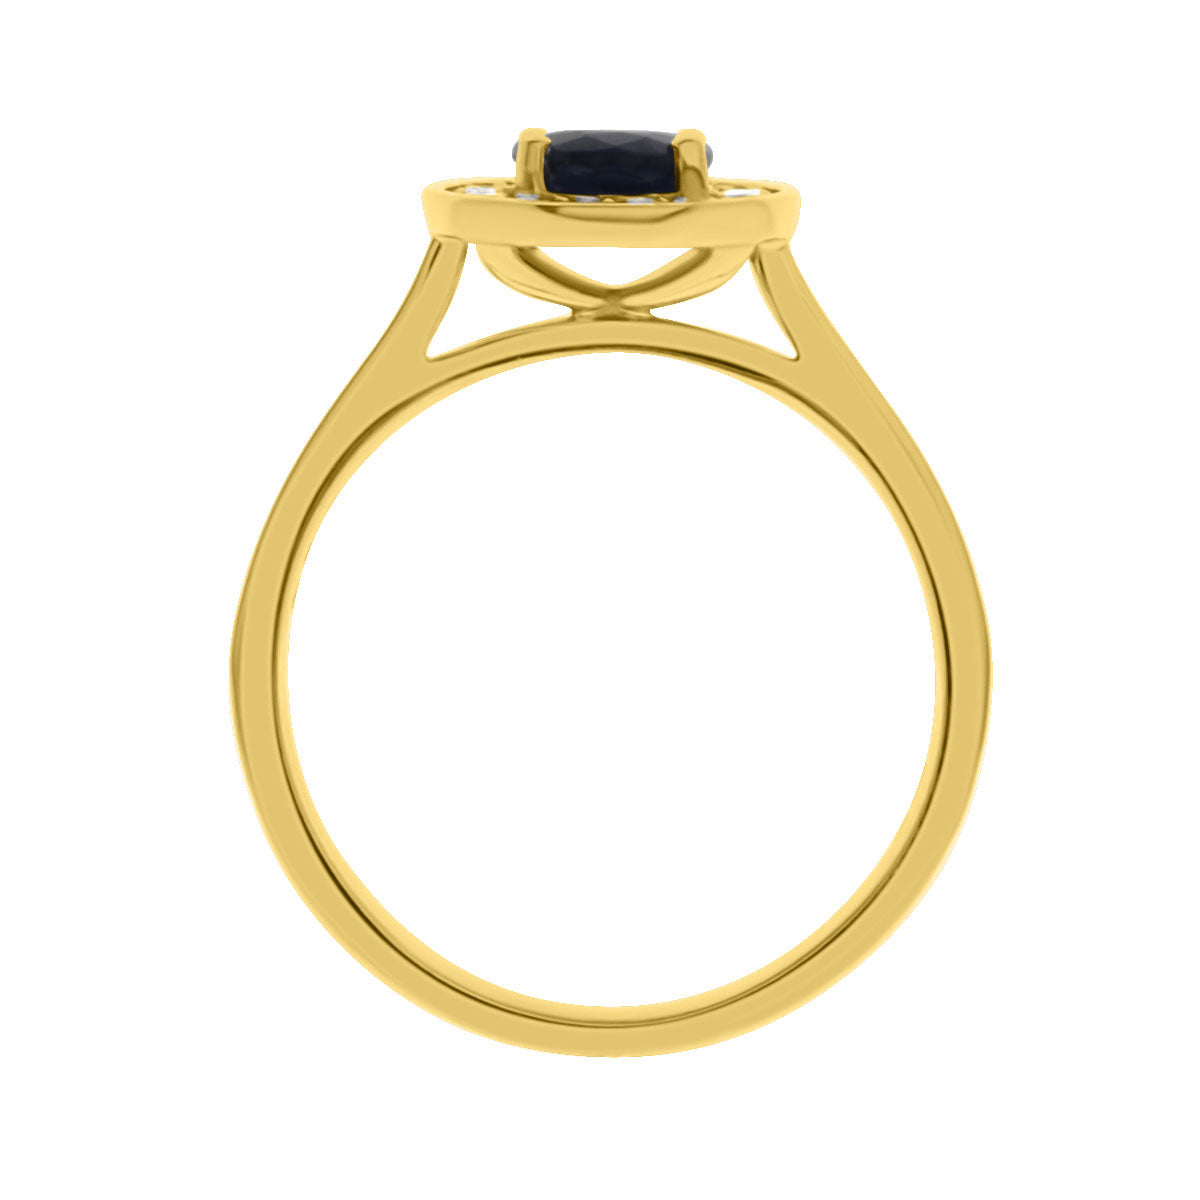 Sapphire Halo Engagement Ring in yellow gold in an upright position